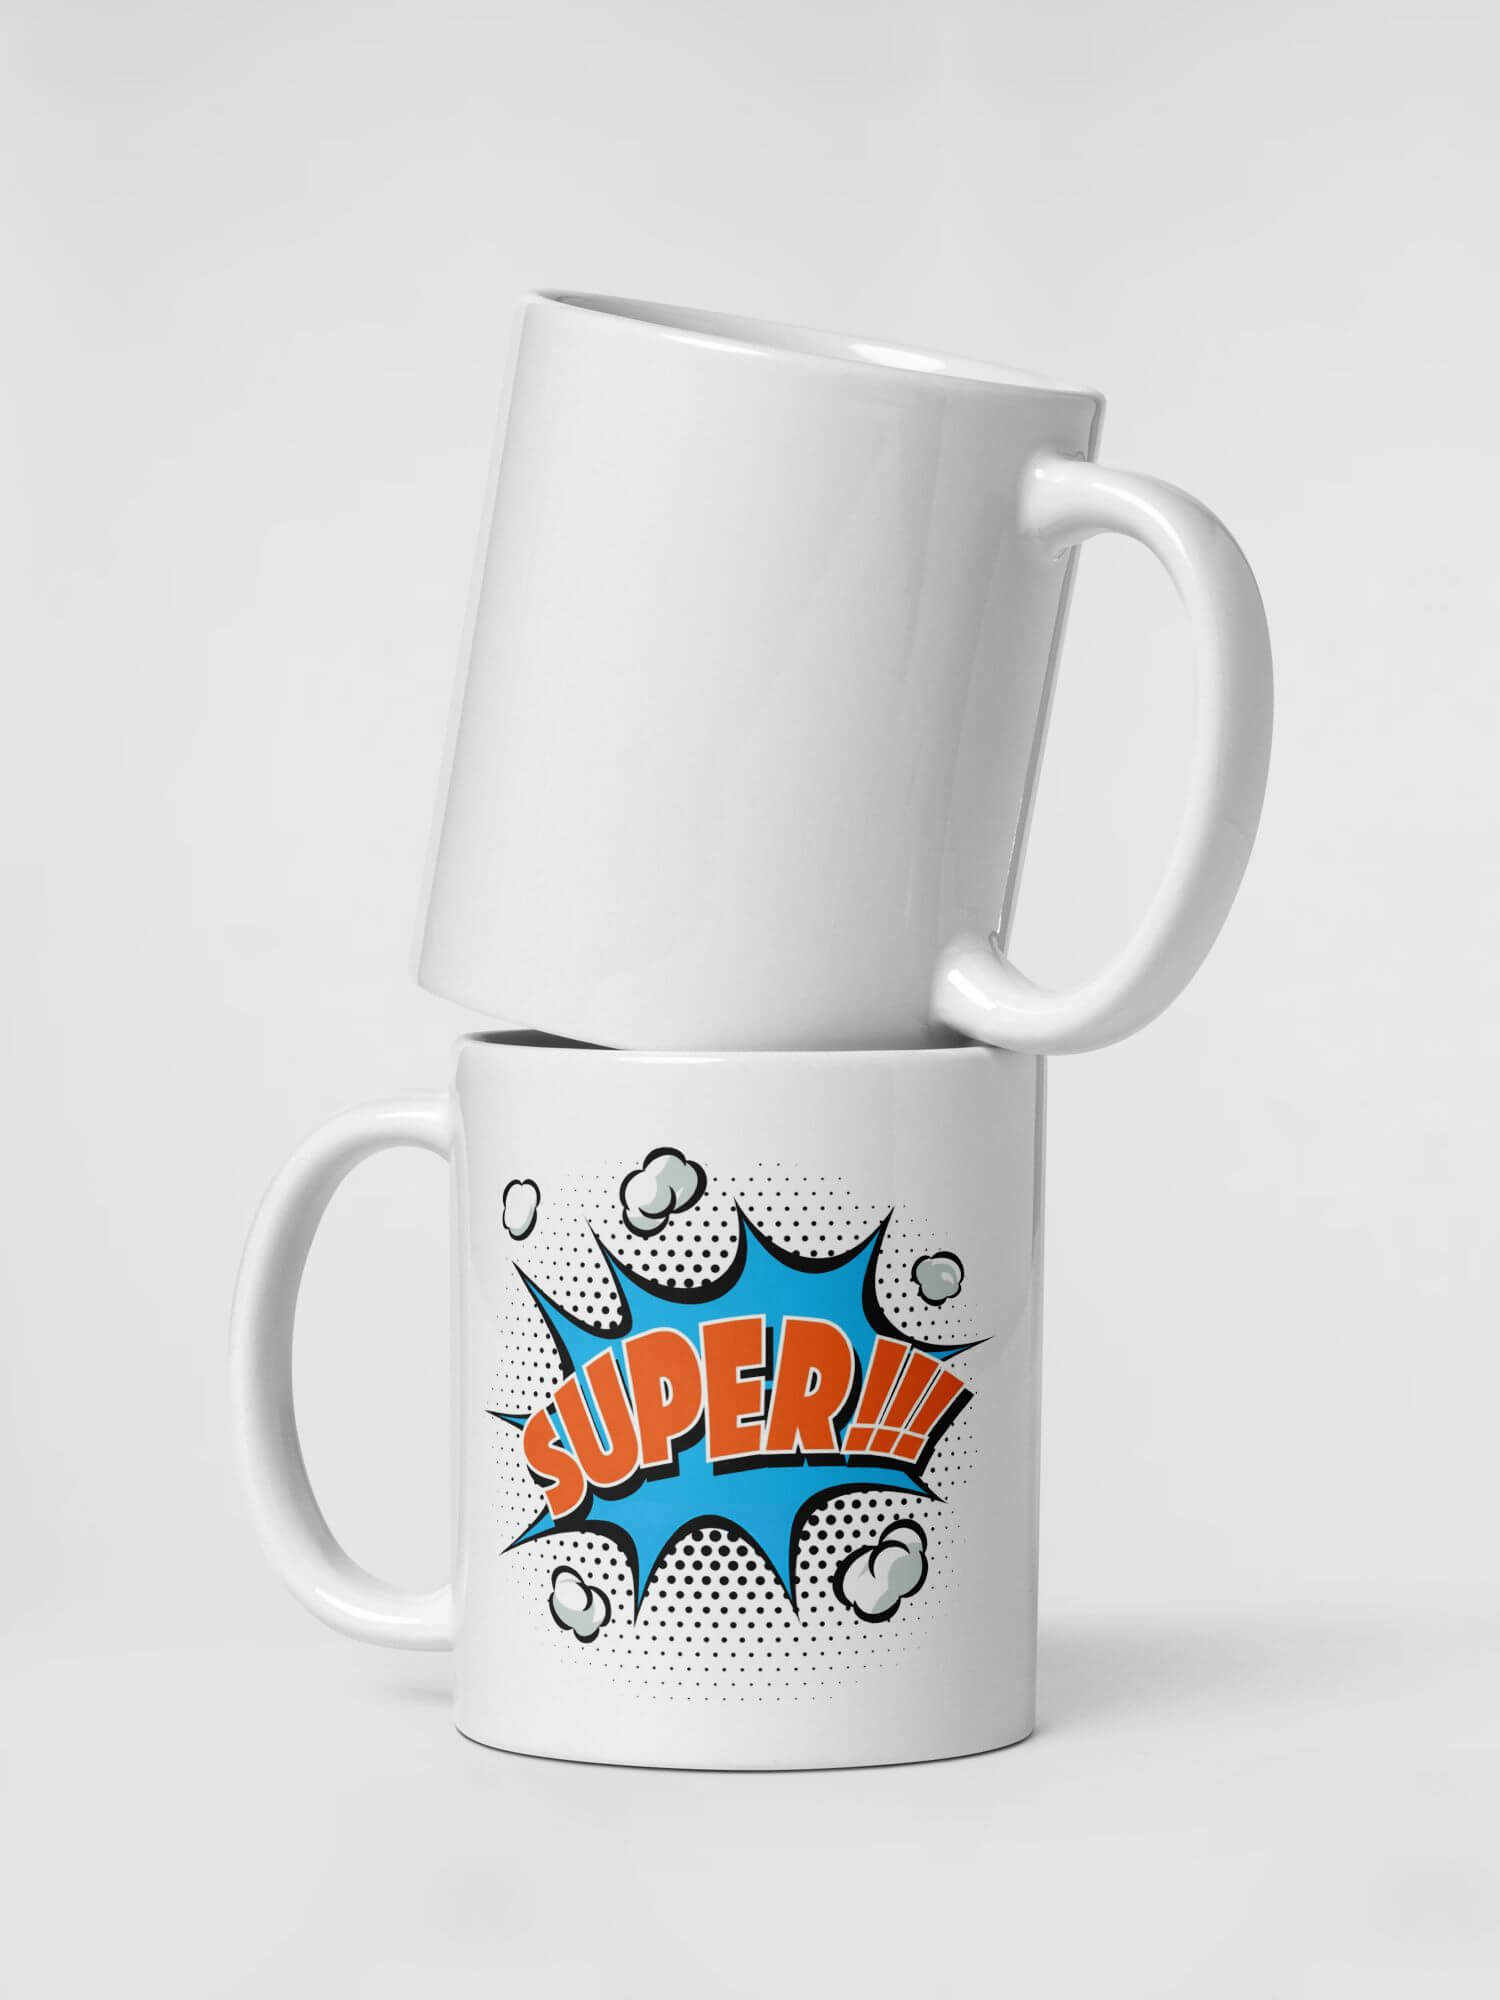 Glossy SUPER!!! Mug              Cartoon expressions drinks cup coffee, tea, juice, milk drinking cups miteigi branded product item tumblers ceramics in white with blue orange multicolor pattern Ceramic Anime superb sign Gifts mugs